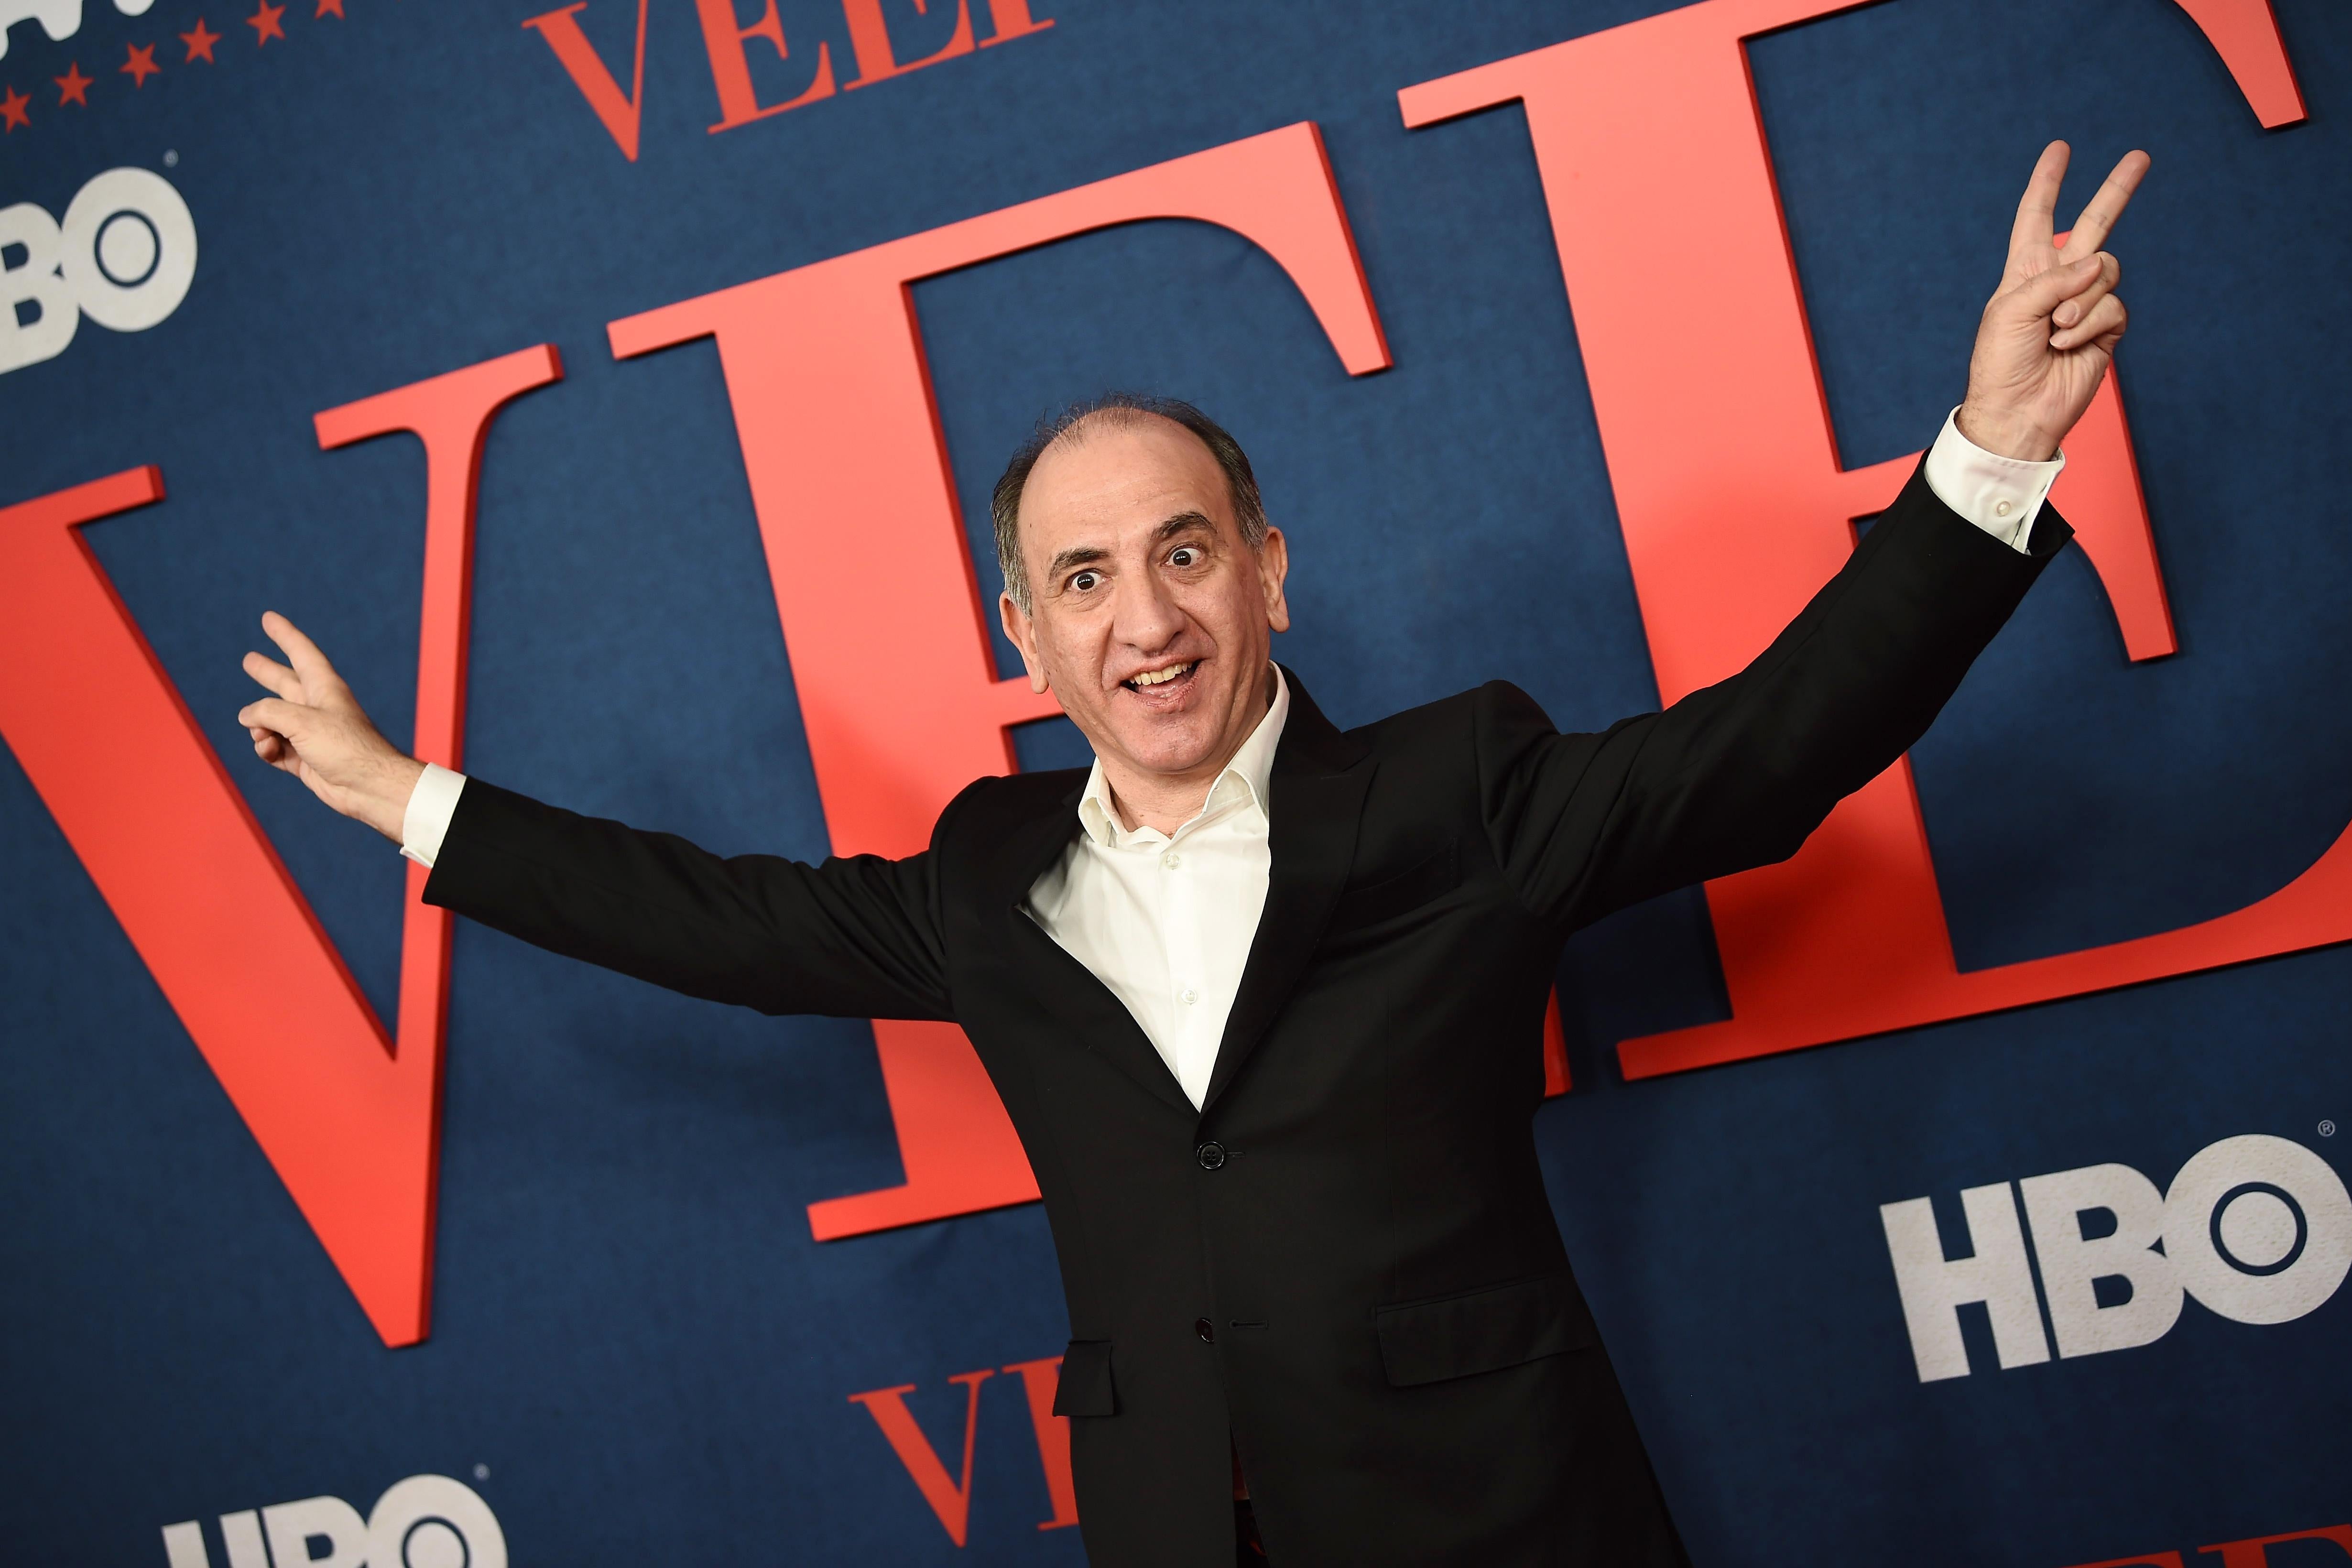 Armando Iannucci, making the Nixon victory gesture, on a red carpet.